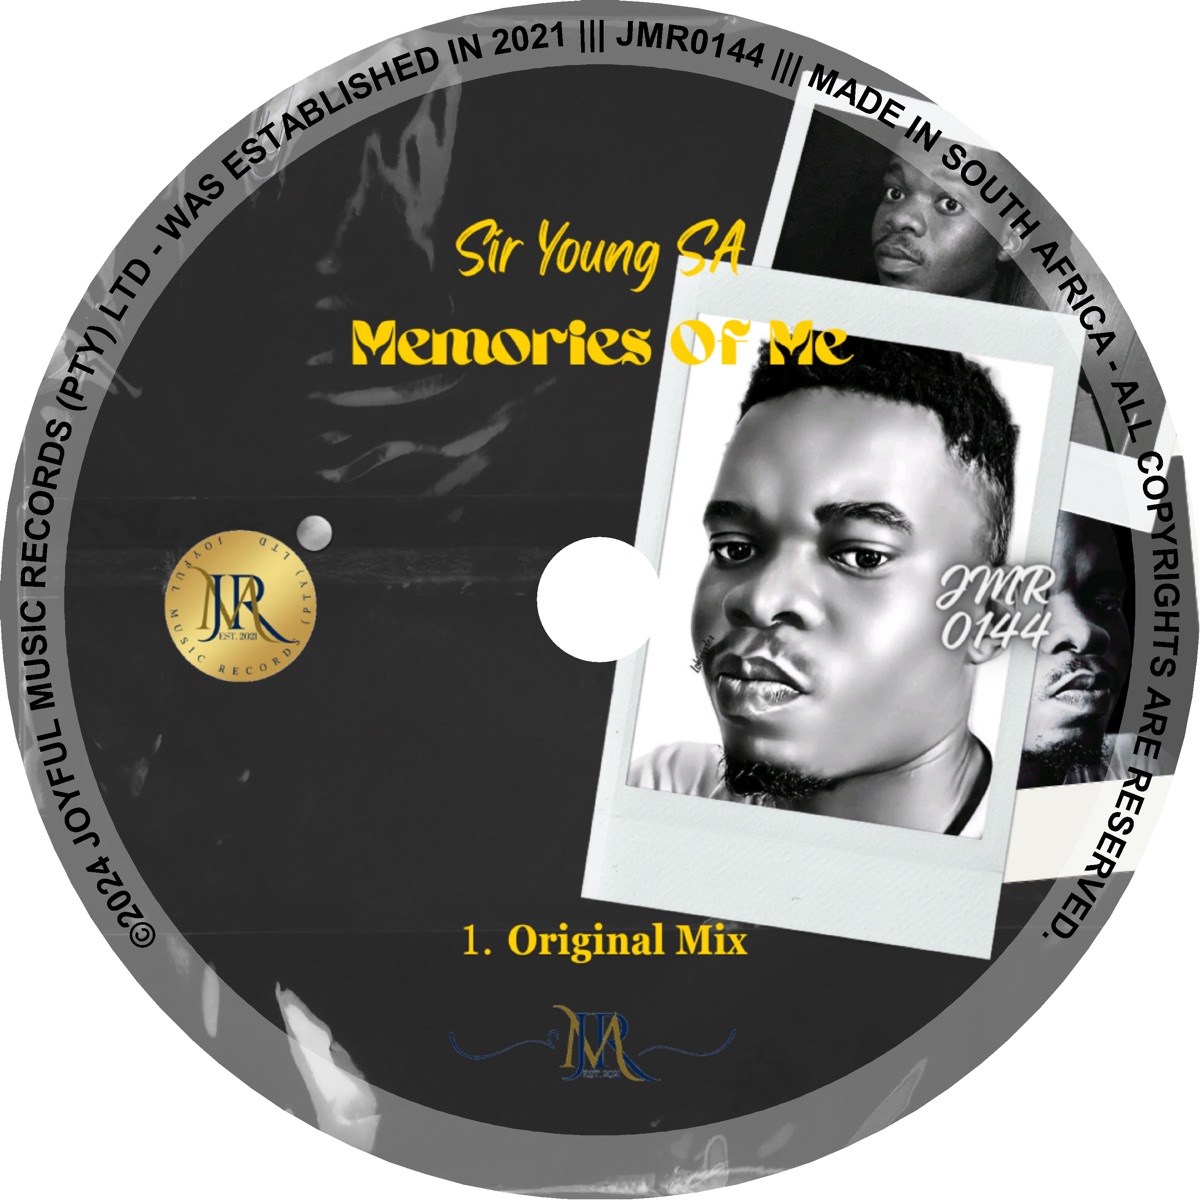 ▂▂▂▂▂▂▂▂▂▂▂▂▂▂
#WeeklyGrooves #174 PREMIERE

by @MusiqWorks

🔊 @YoungDeejay1 - Memories of Me (Original Mix)
/Joyful Music Records

🌐 fb.com/siryoungsa/
📸 instagram.com/siryoungsa/

on #🆁🅺🅲 📻radiokc.fm
▂▂▂▂▂▂▂▂▂▂▂▂▂▂